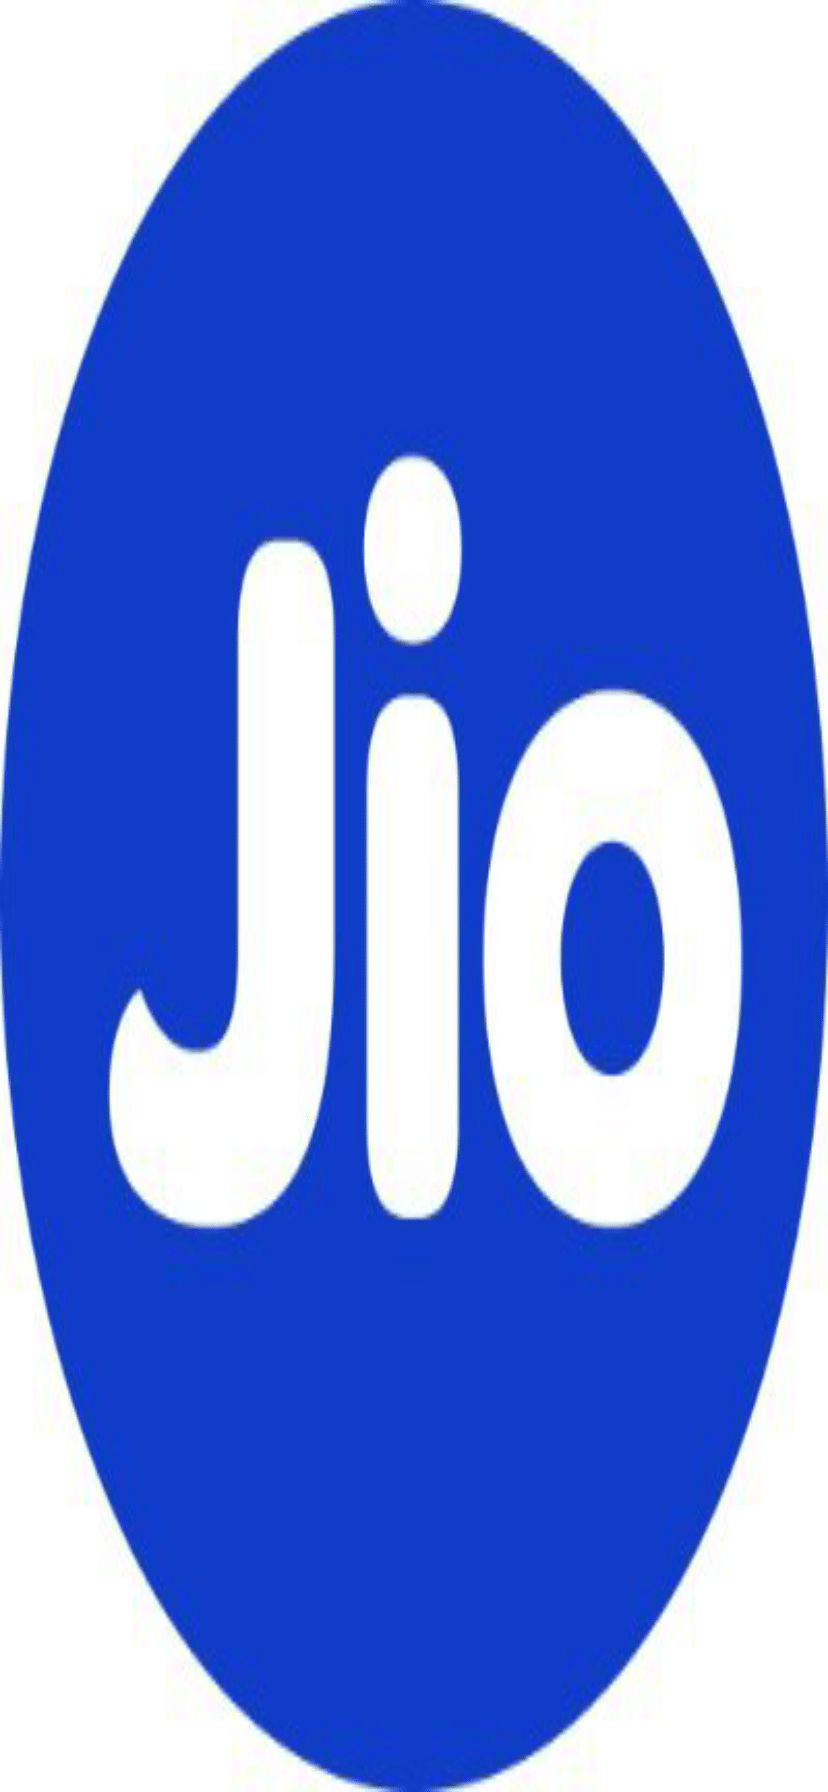 Prepaid Plans From Bharti Airtel, BSNL, Vi and Jio With Maximum FUP Data  Listed